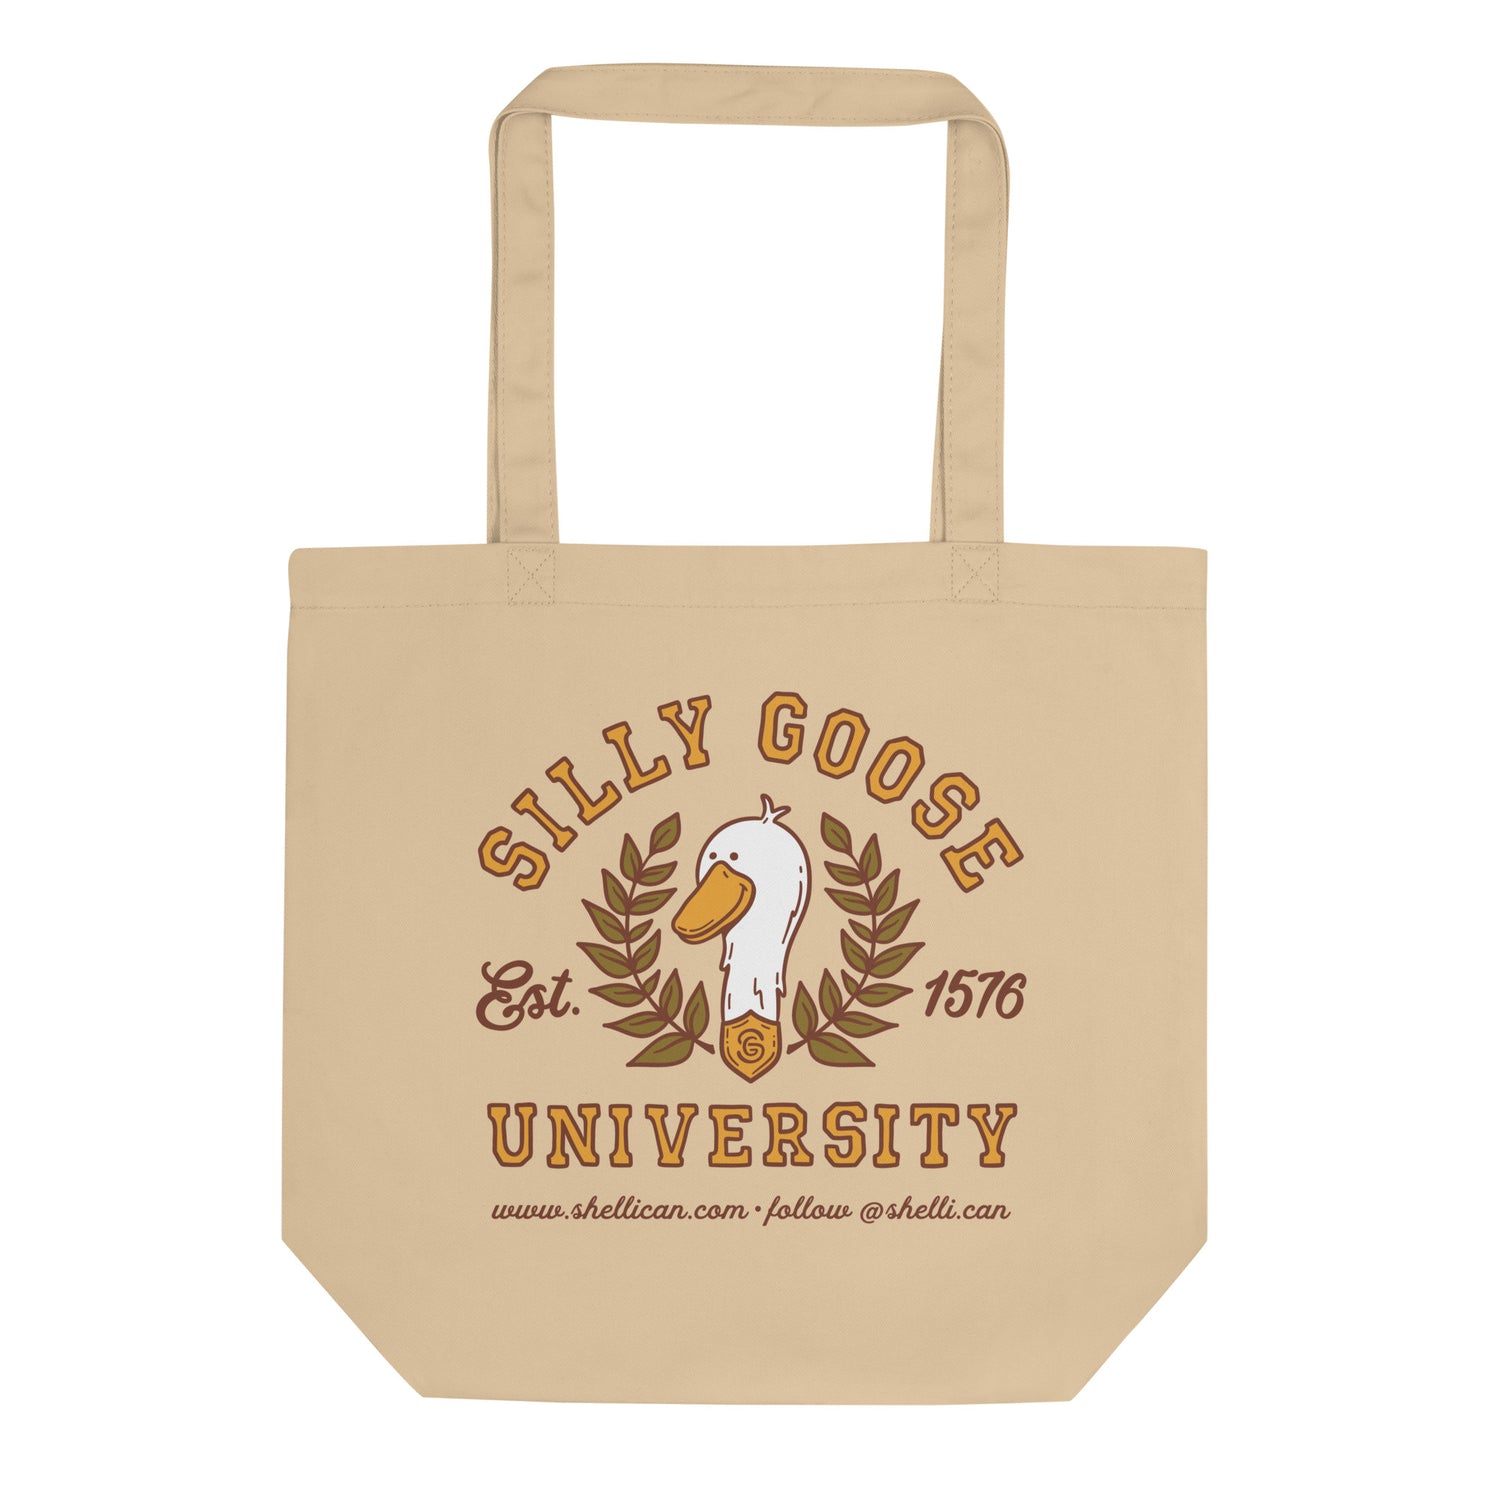 U Silly Goose Tote